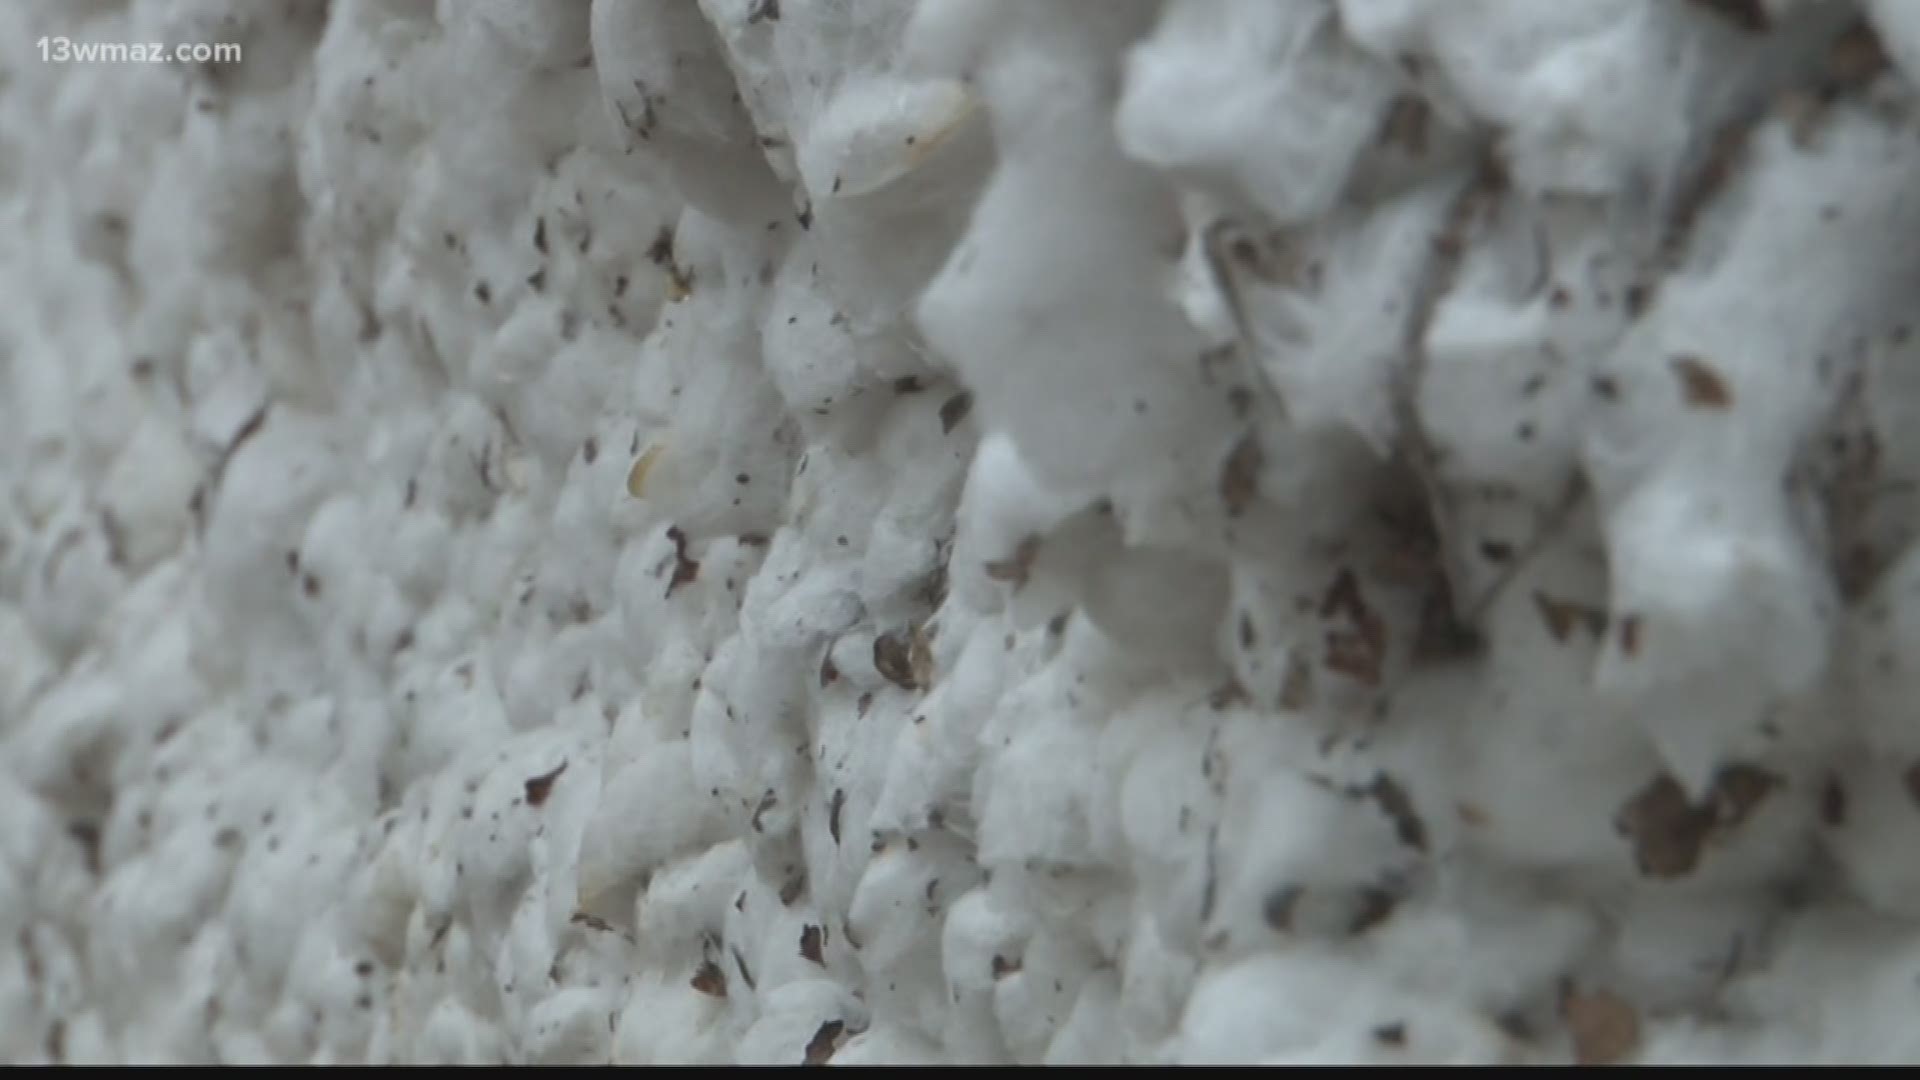 59 cotton gins dot the Georgia landscape, one of them in Cochran. Suzanne Lawler takes you inside a gin to see the process for one of Georgia's biggest crops.